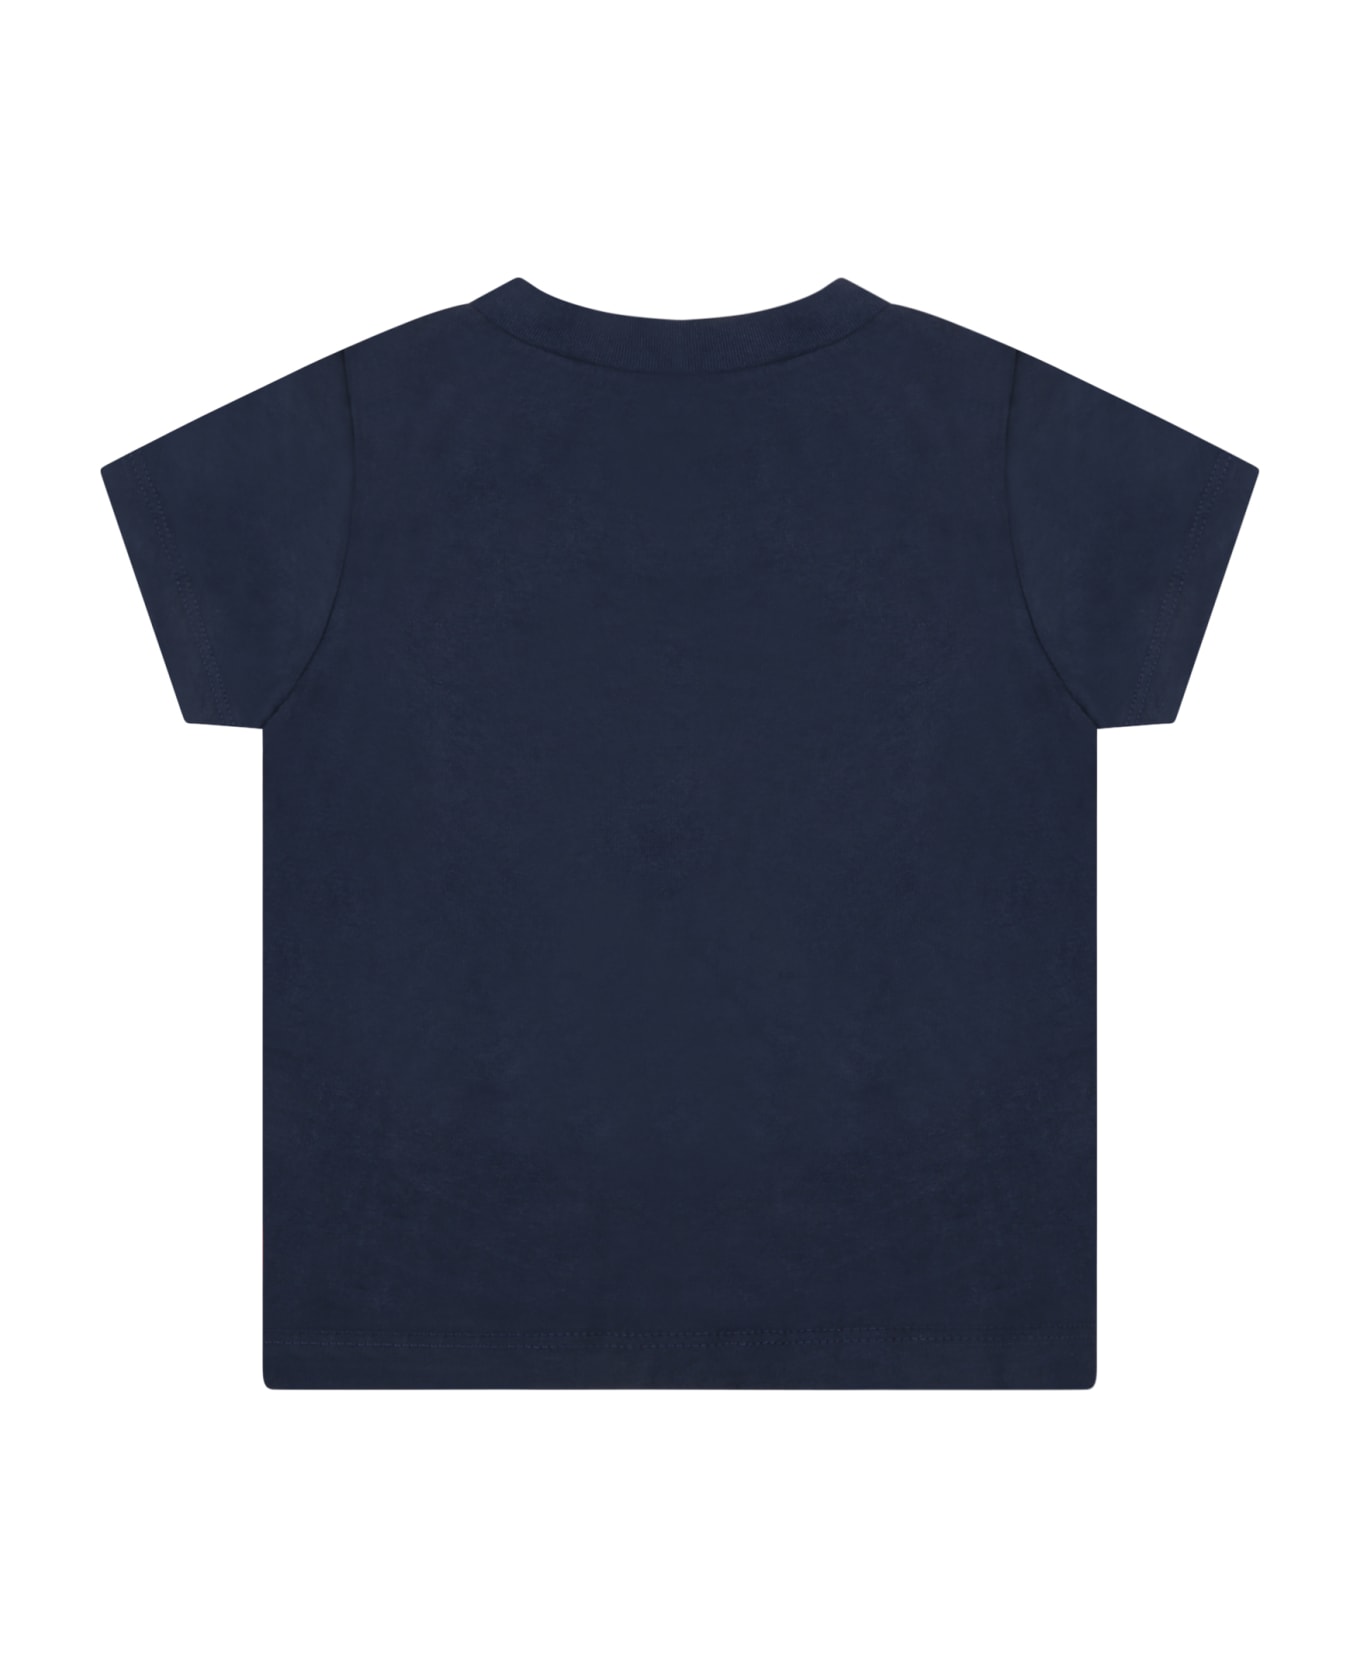 Levi's Blue T-shirt For Babies With Patch Logo - Blue Tシャツ＆ポロシャツ